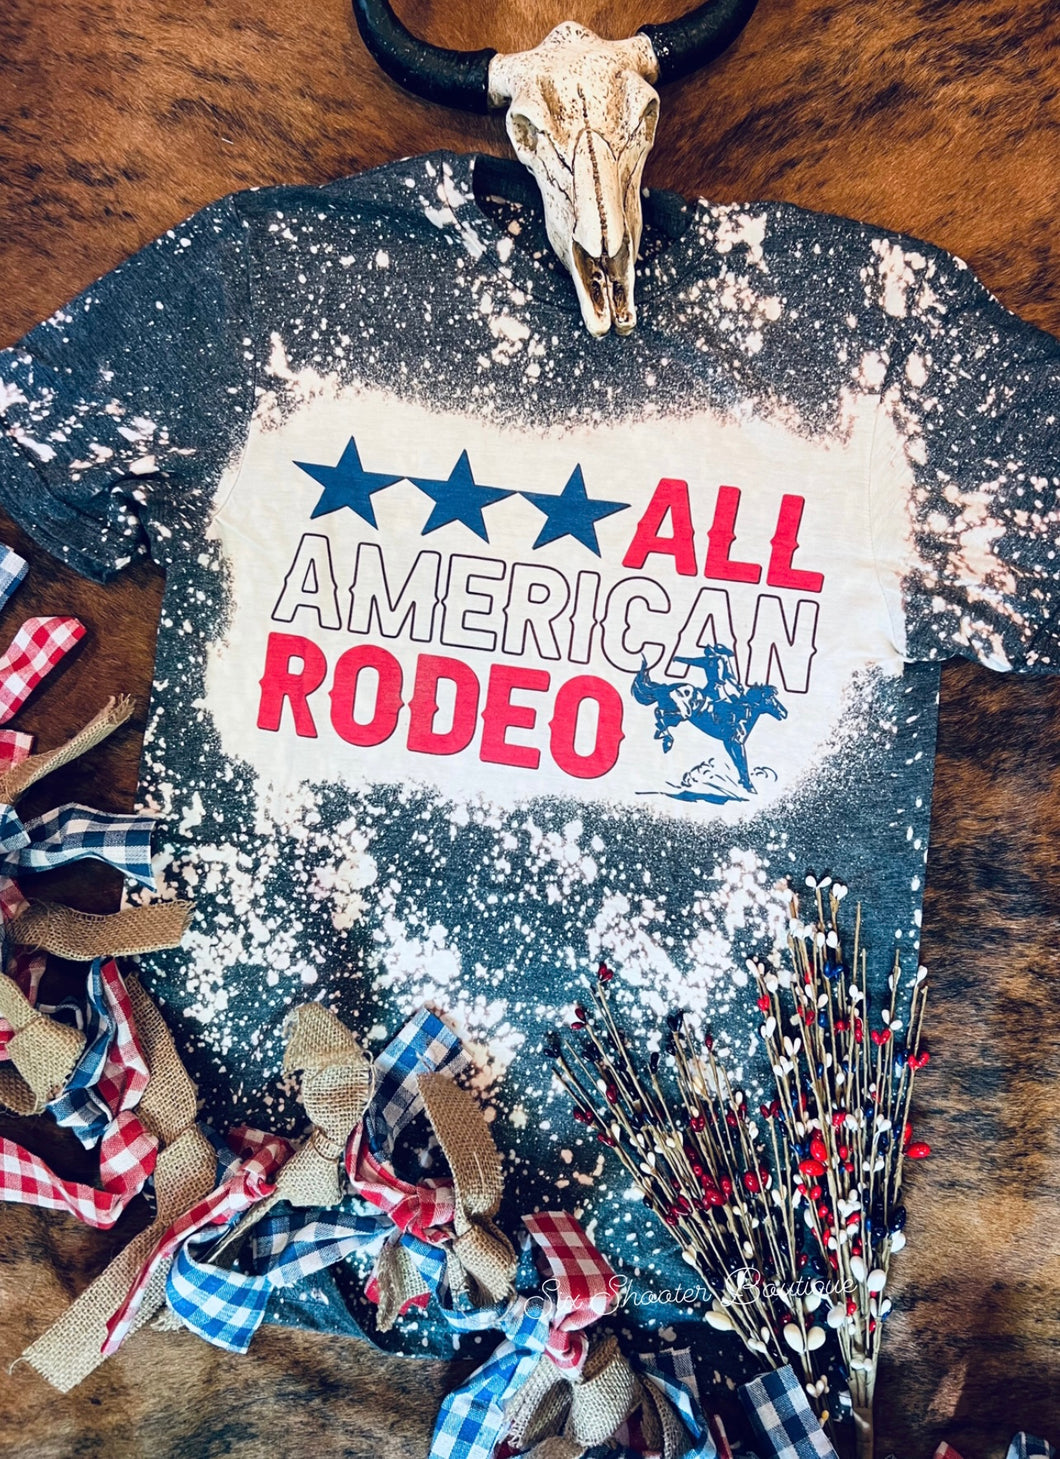 All American rodeo tee